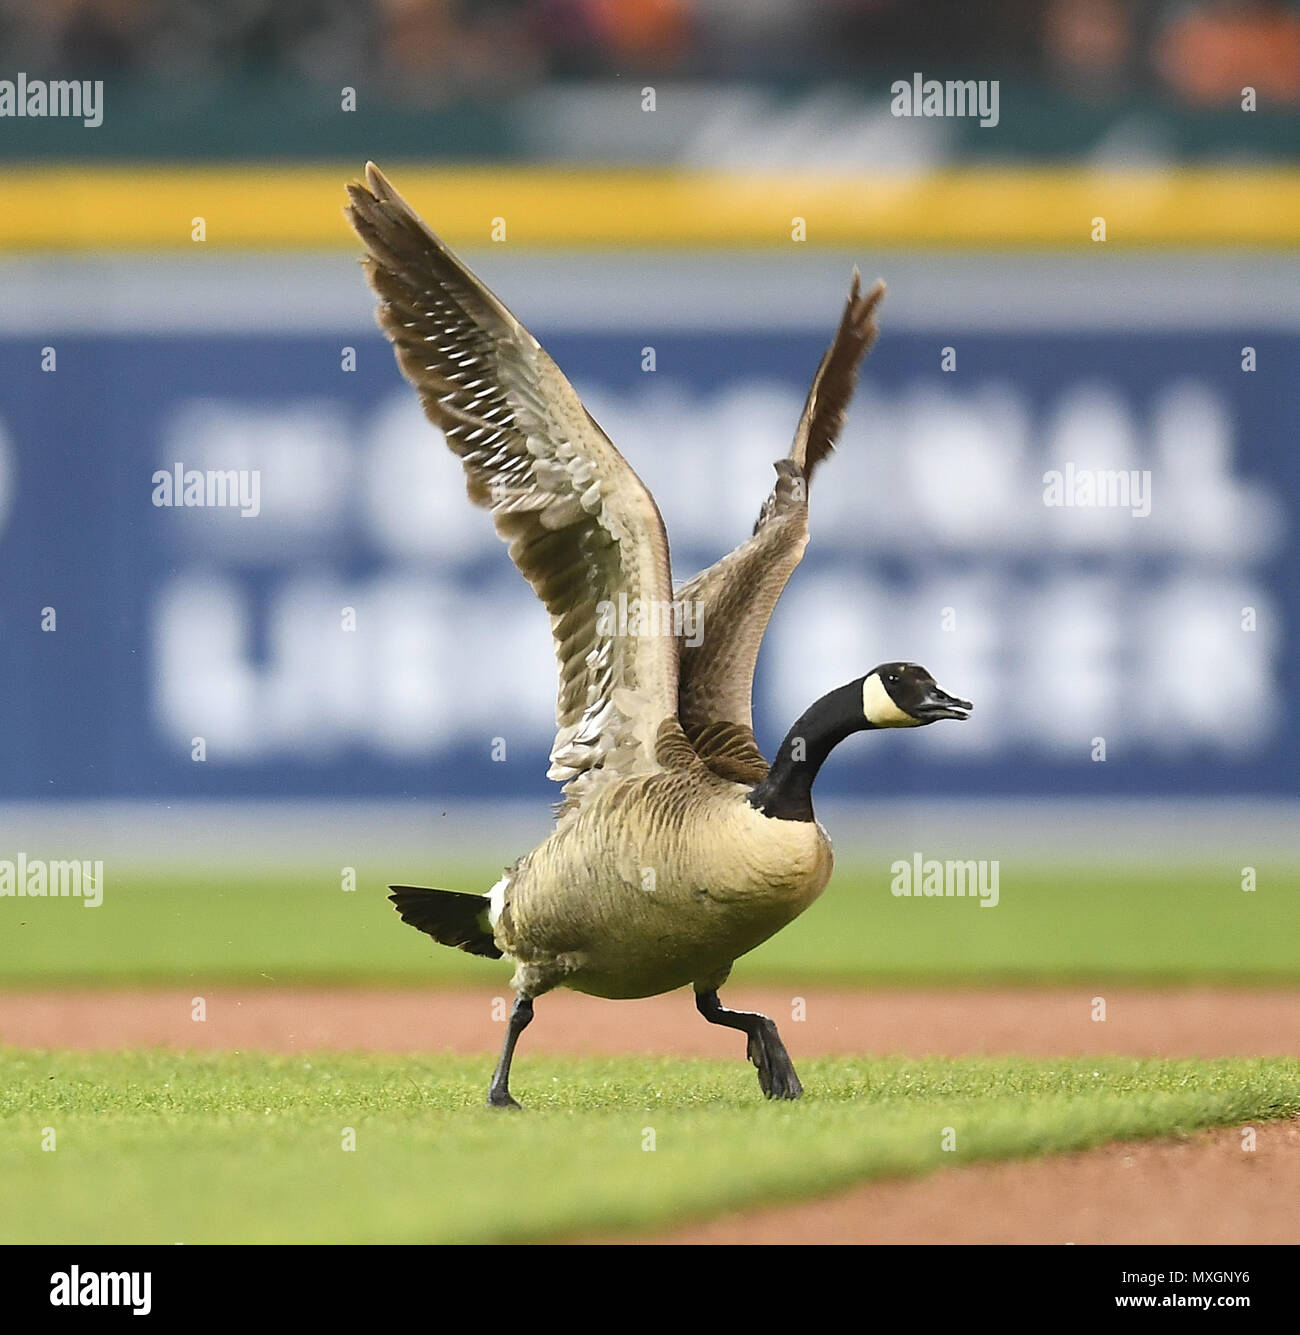 Ducks (and Angels) fly together! - Los Angeles Angels